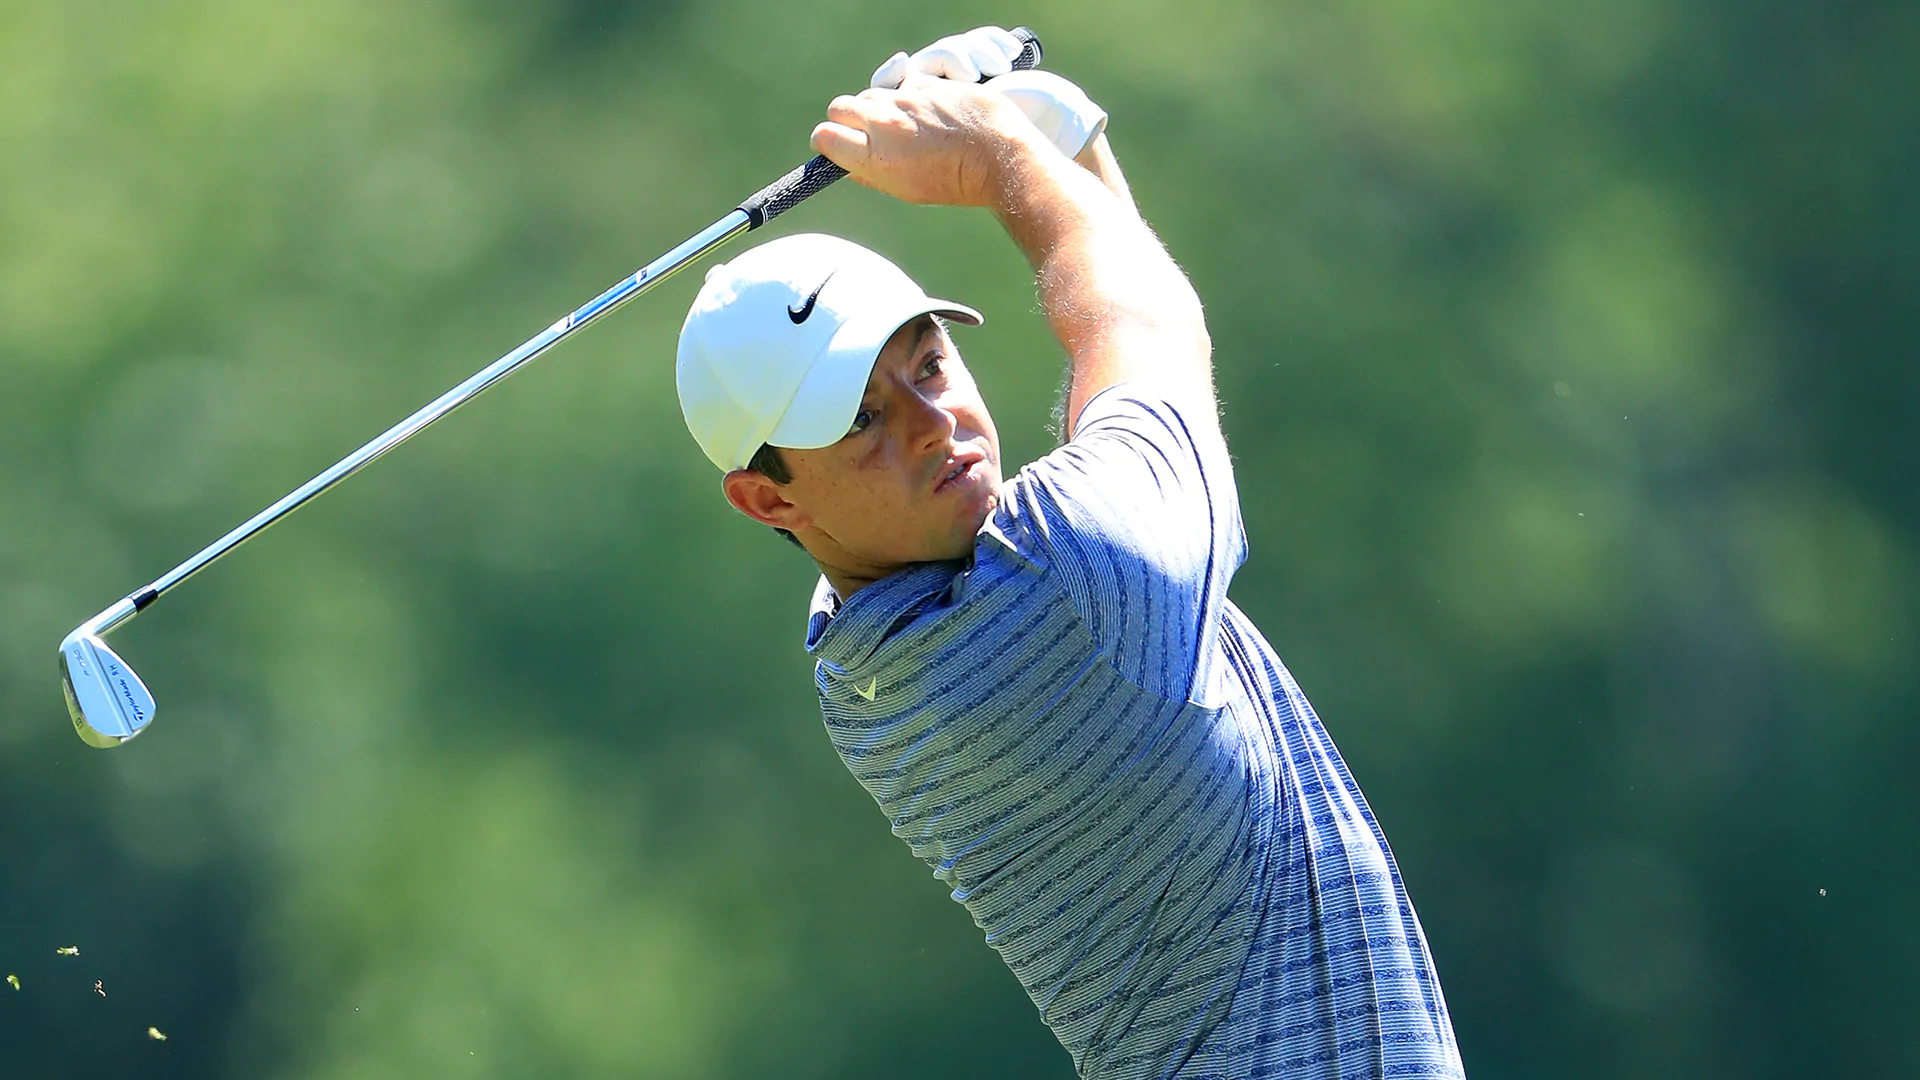 Quail Hollow still not 'Rory-proof' as McIlroy fires 66